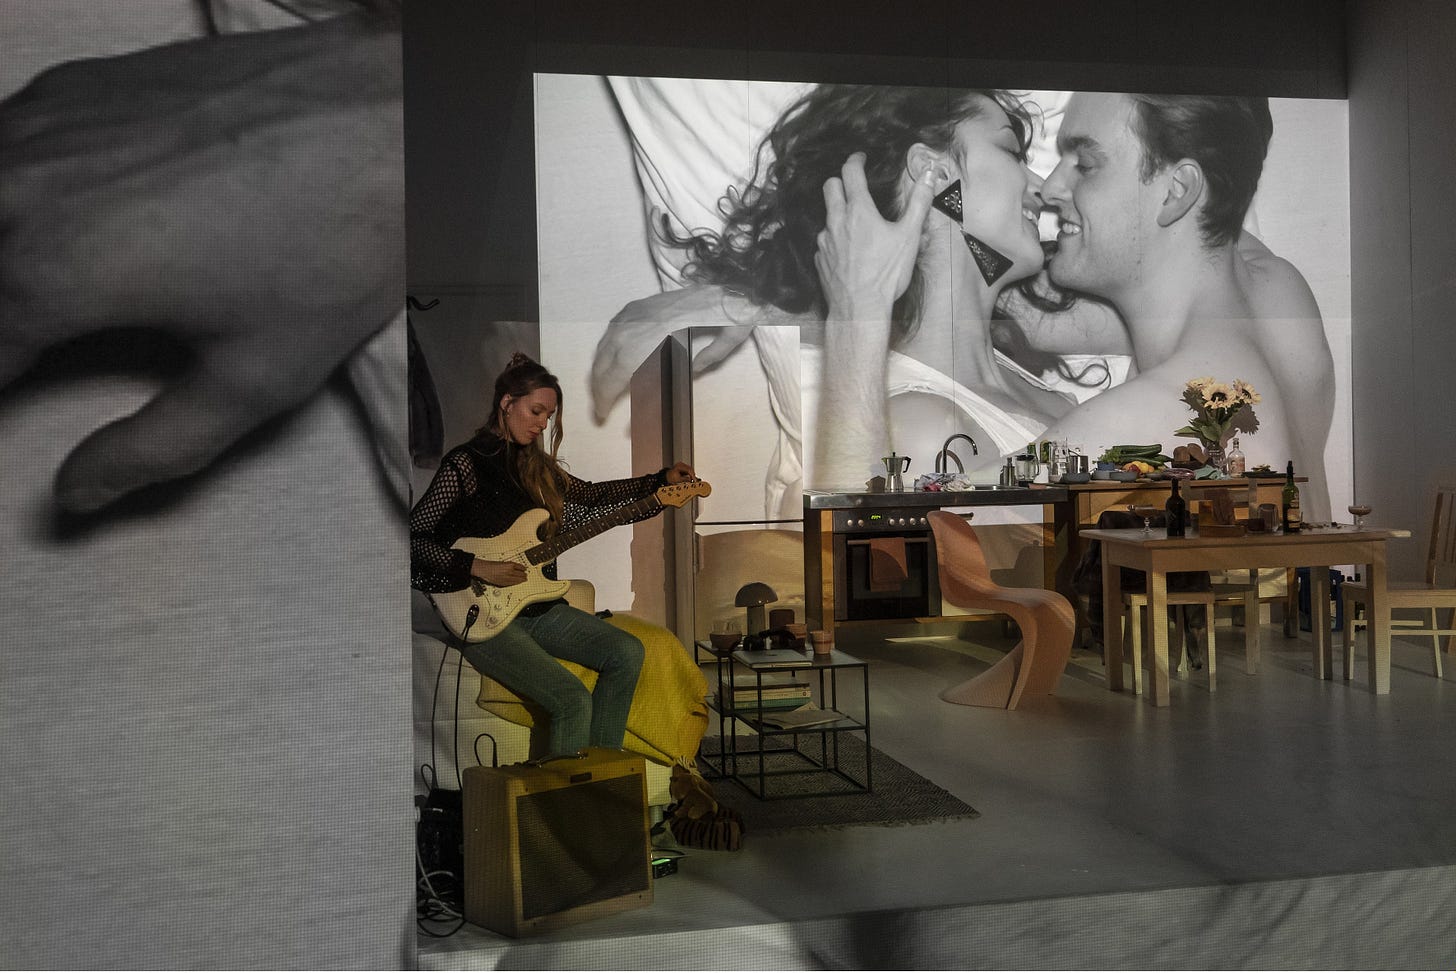 A woman plays a guitar in an apartment on the wall of which we can see  a projection of two lovers.